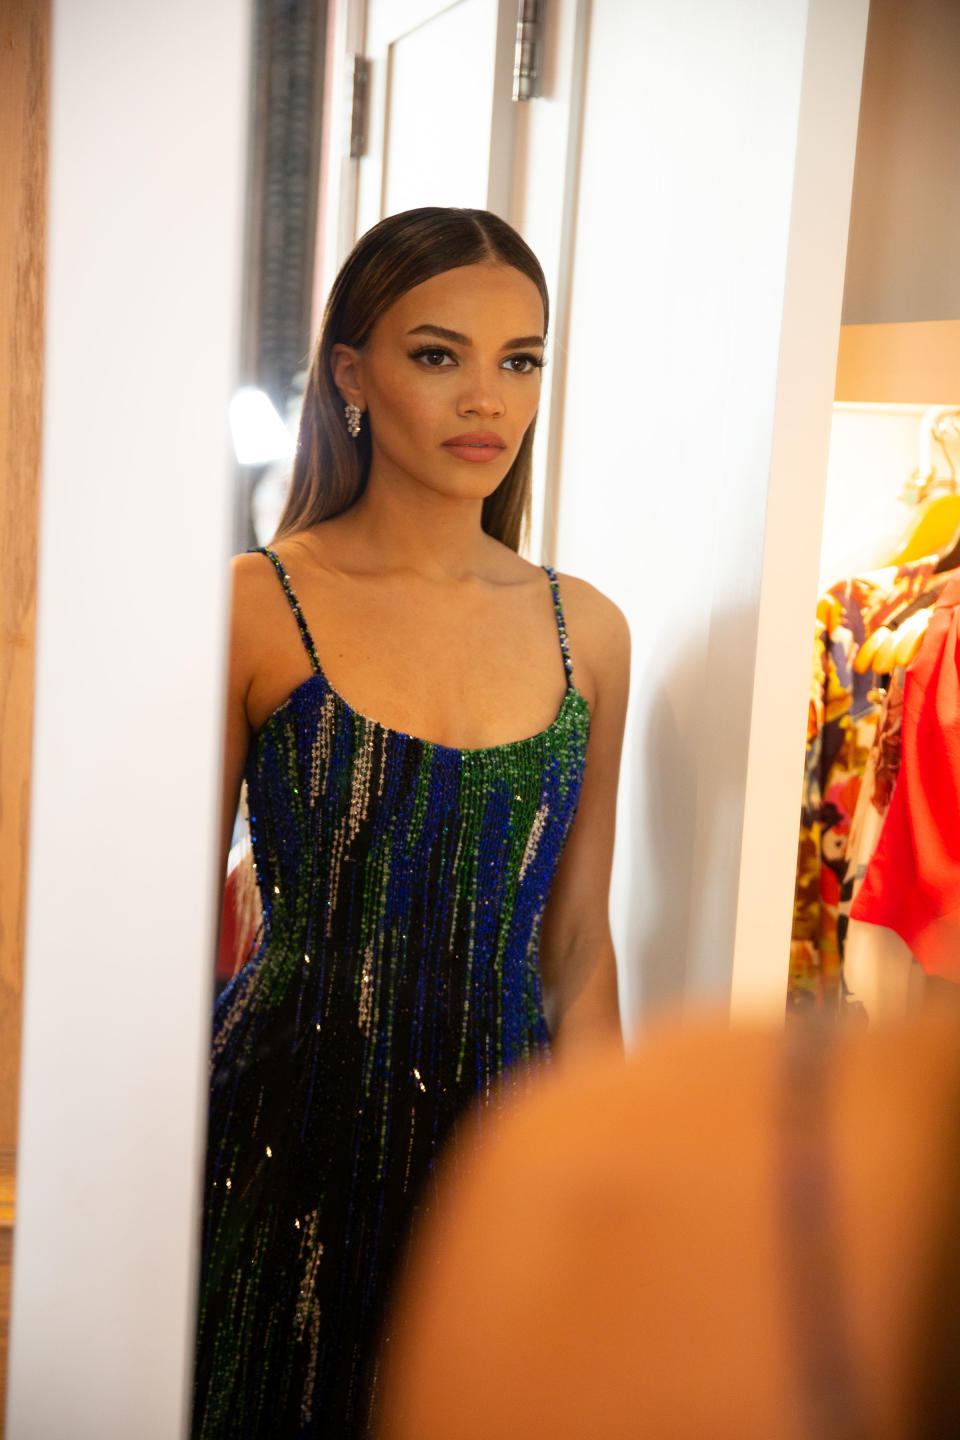 In The Heights Star Leslie Grace Wowed in Armani at the Tribeca Film Festival